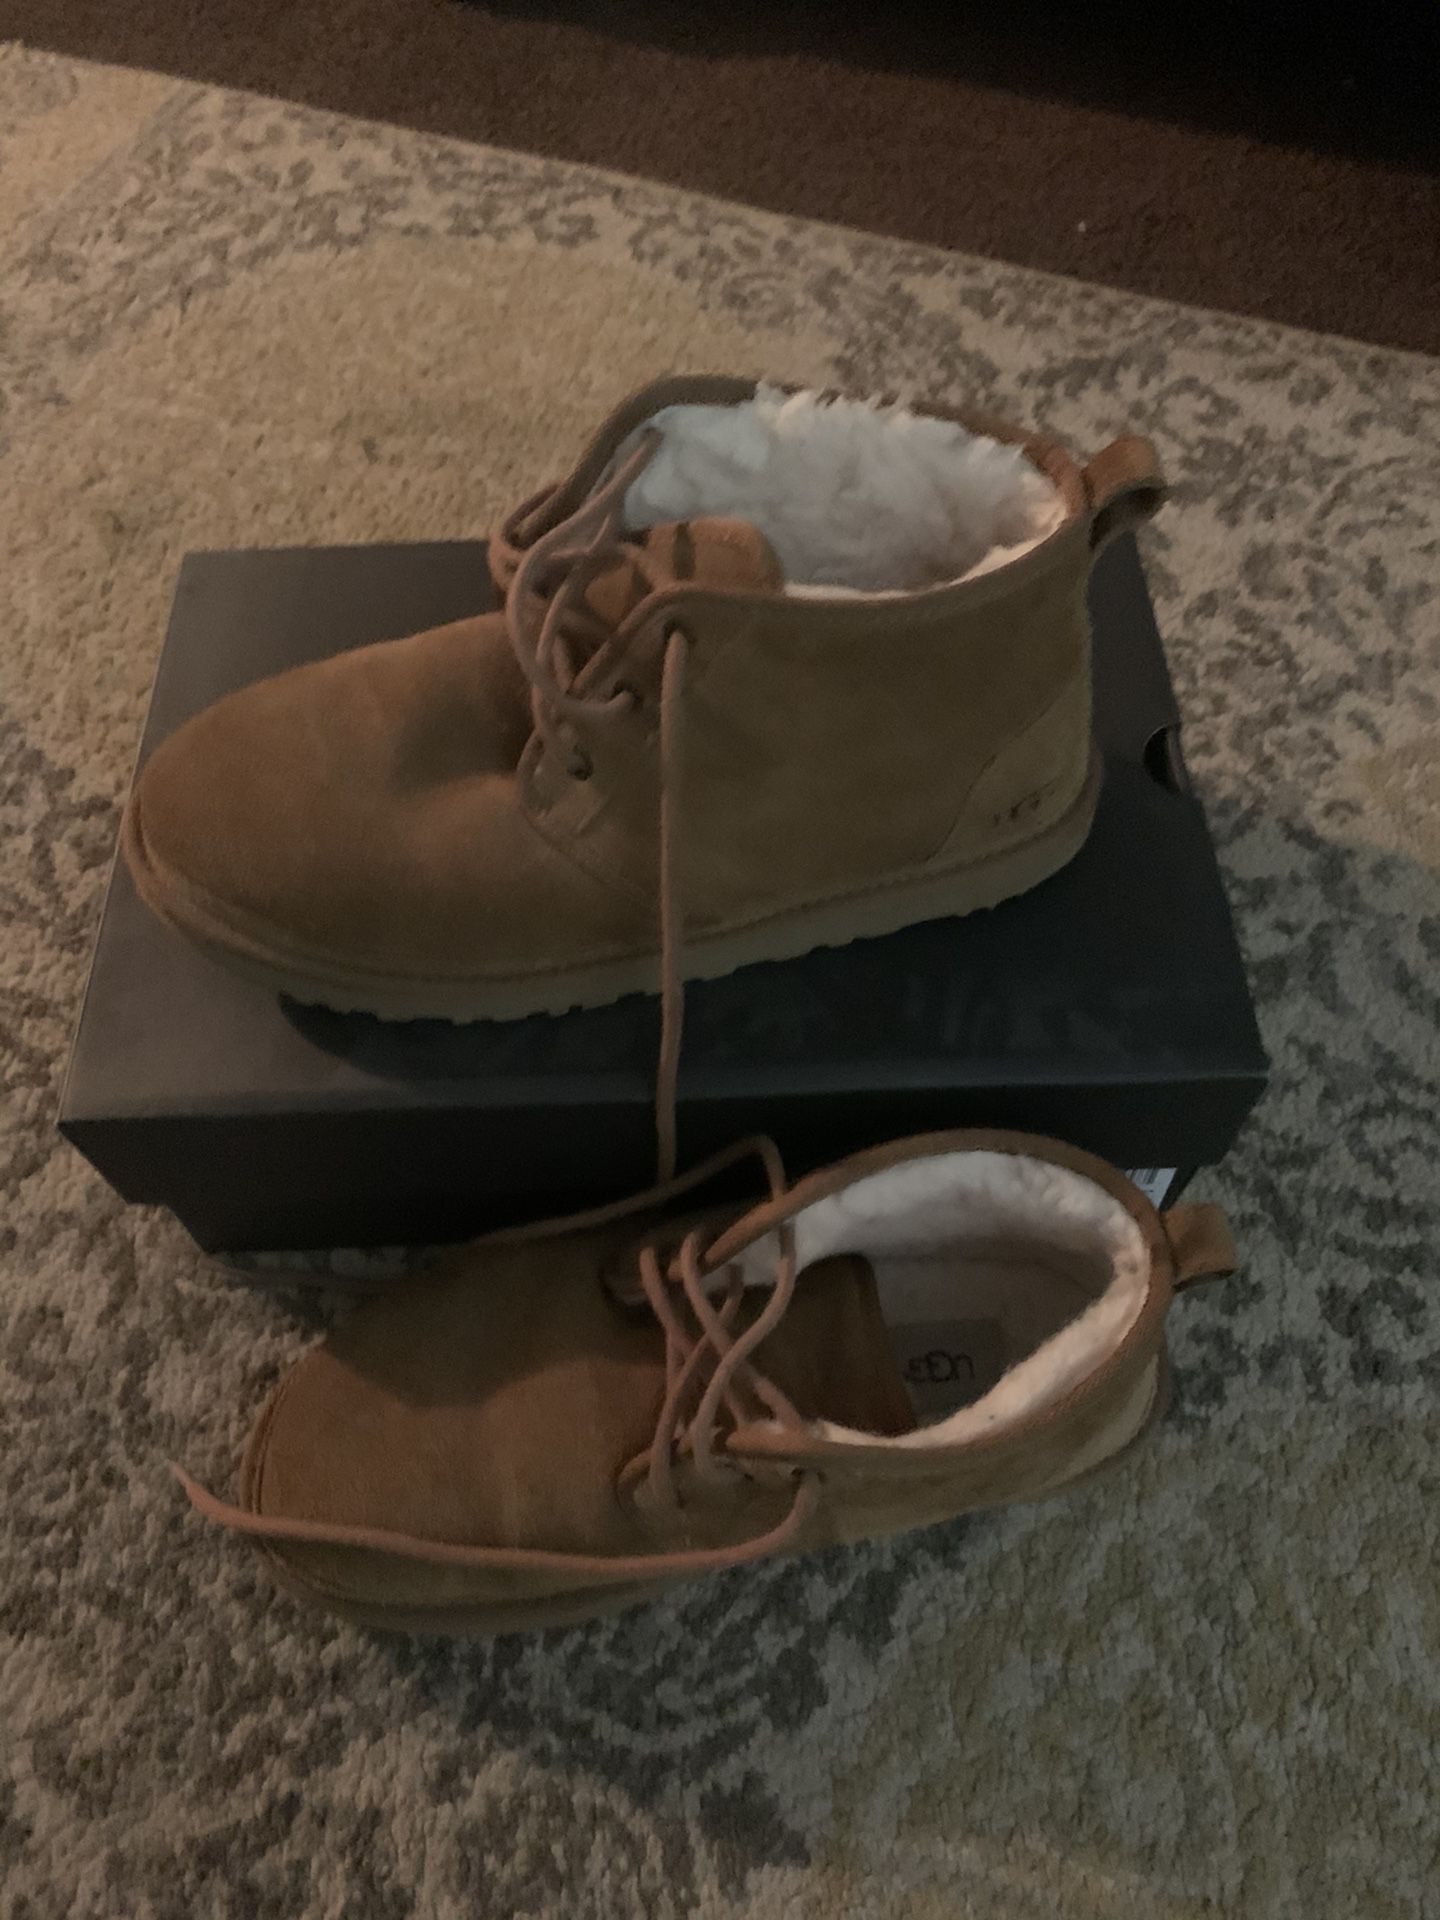 Mens Uggs For 85 Wore 1 Time